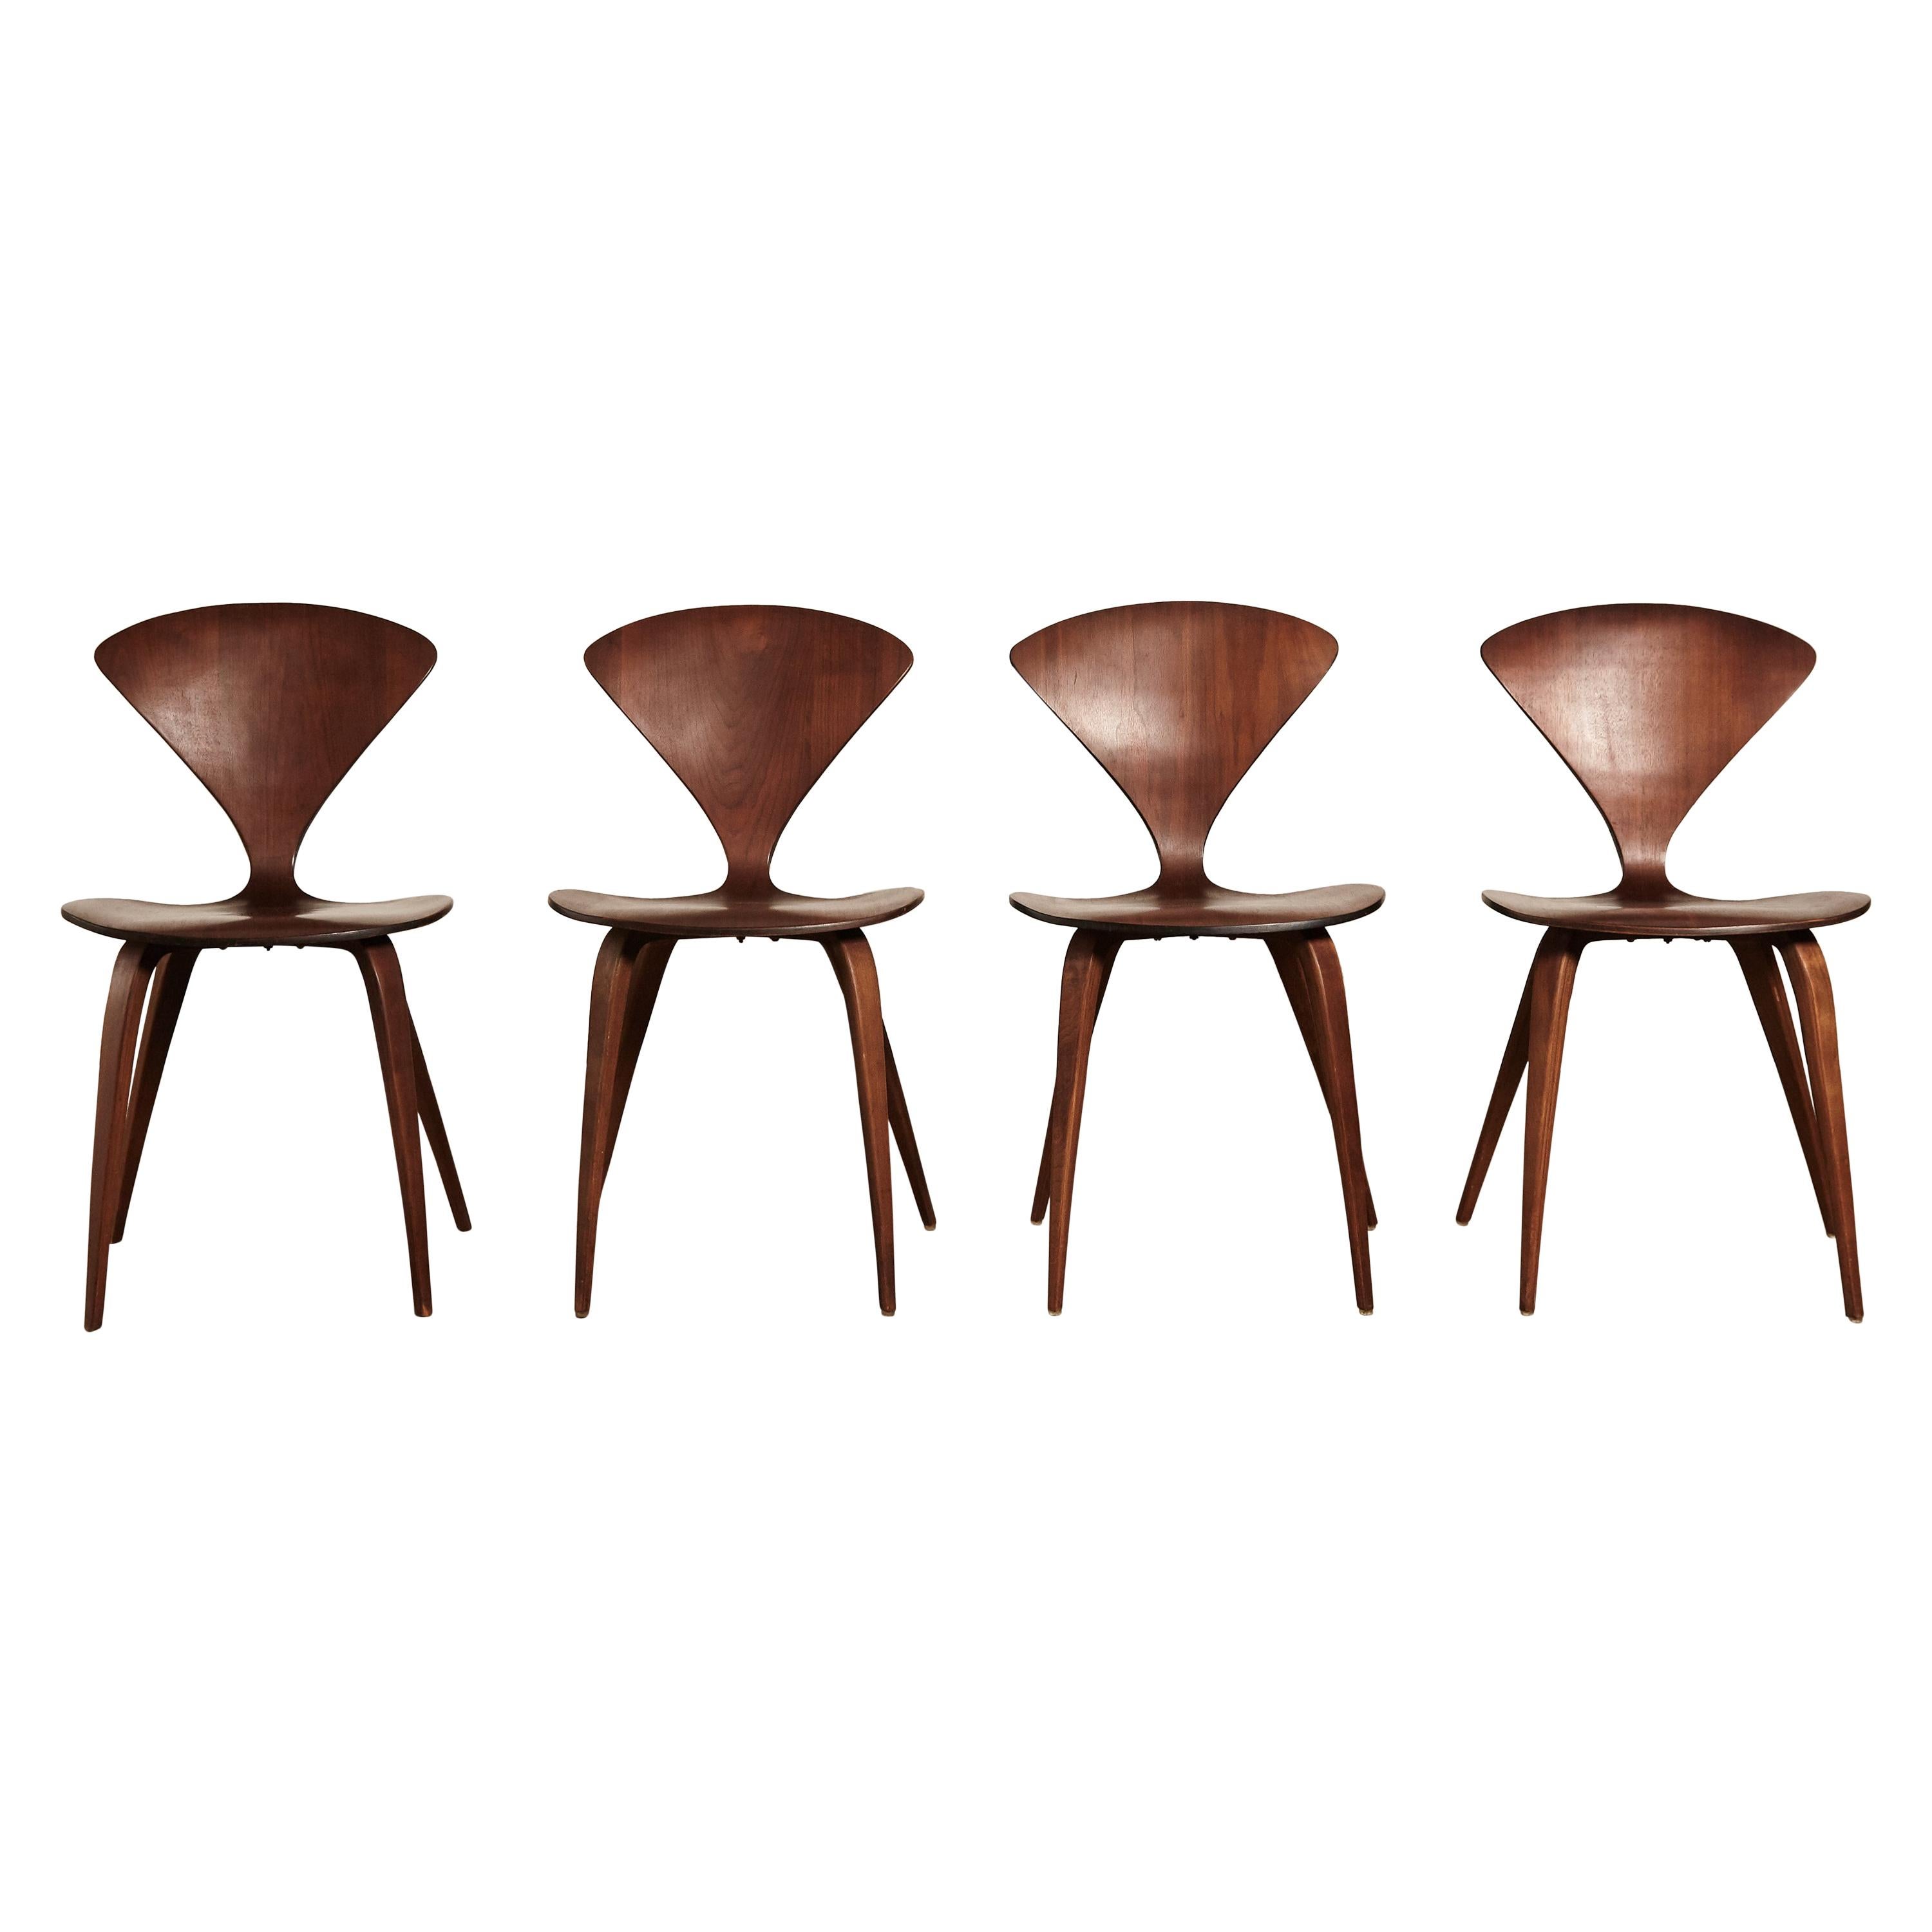 Set of Four Norman Cherner Dining Chairs, Plycraft, USA, 1960s